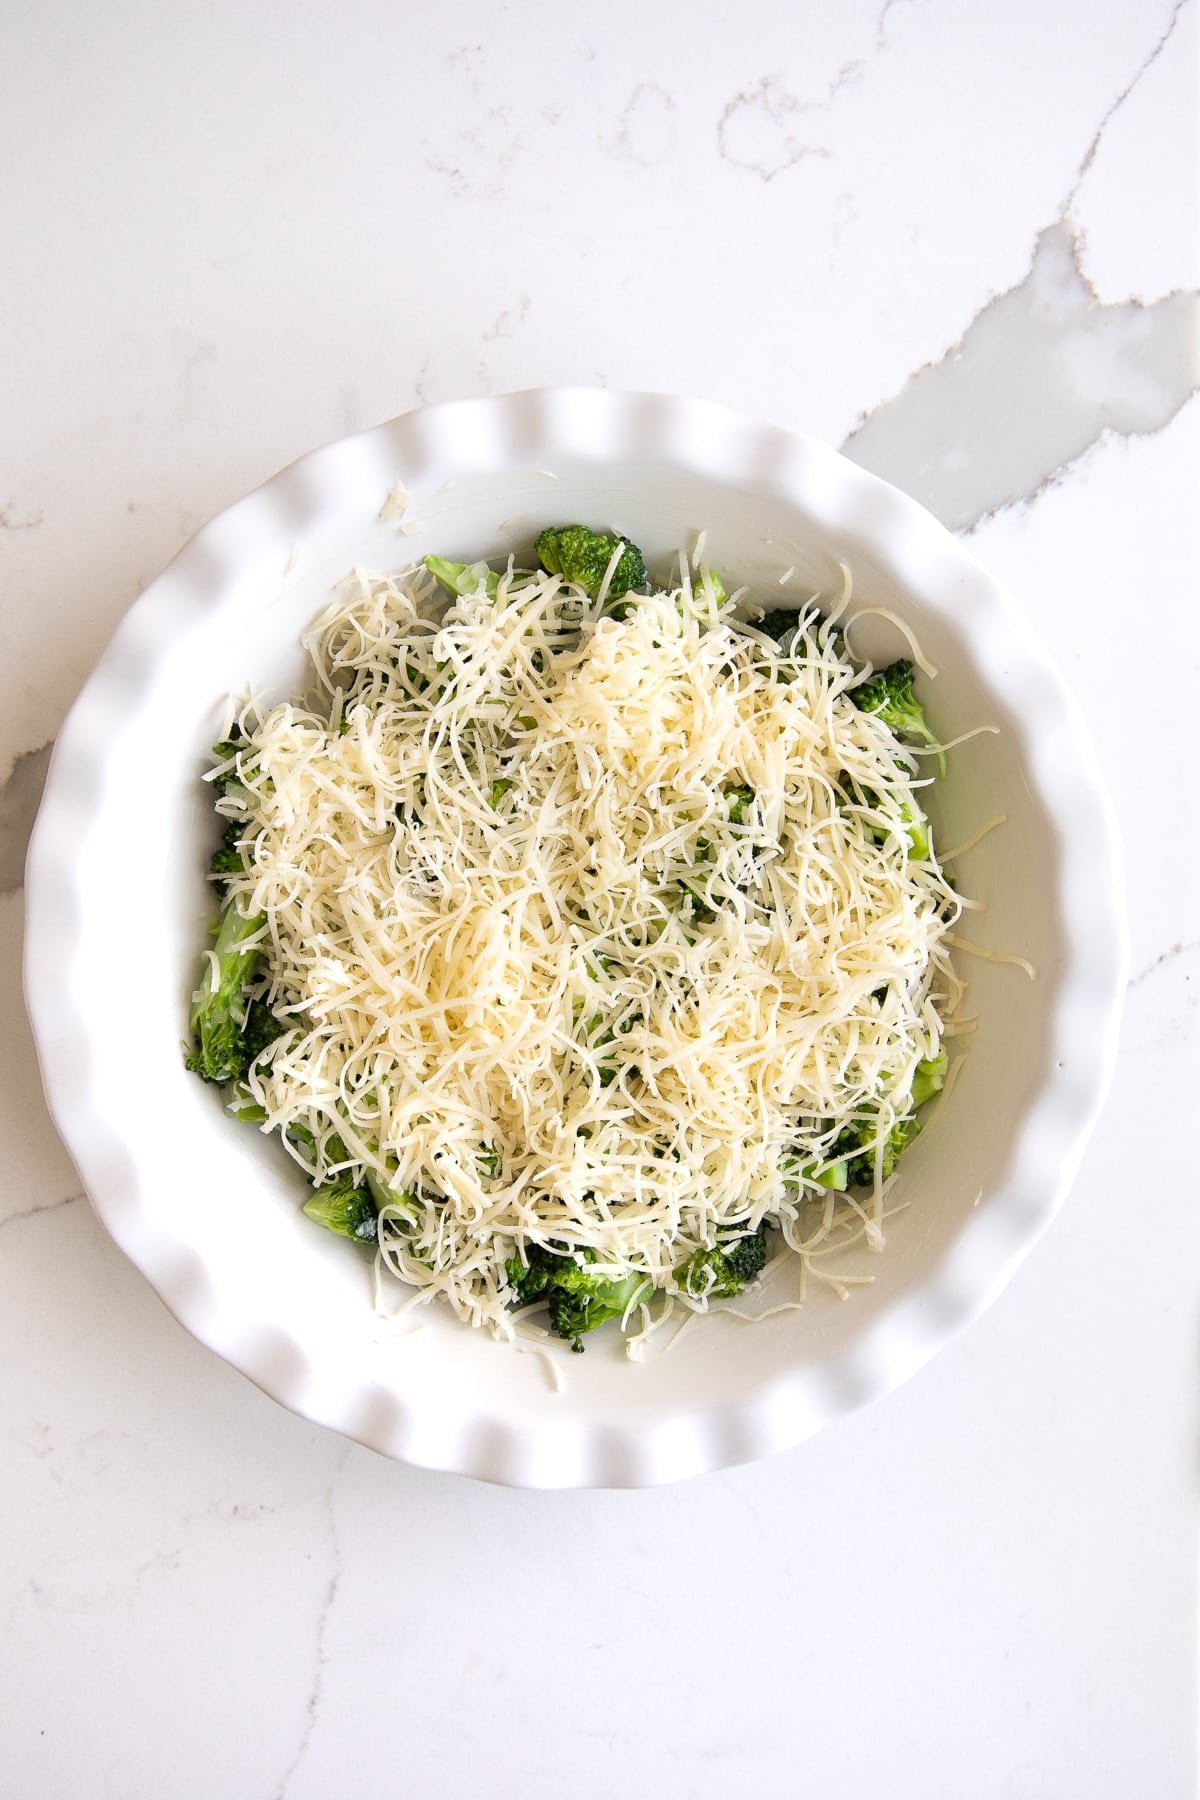 Overhead image of a white pie plate filled with cooked broccoli and shallots and topped with shredded cheese.